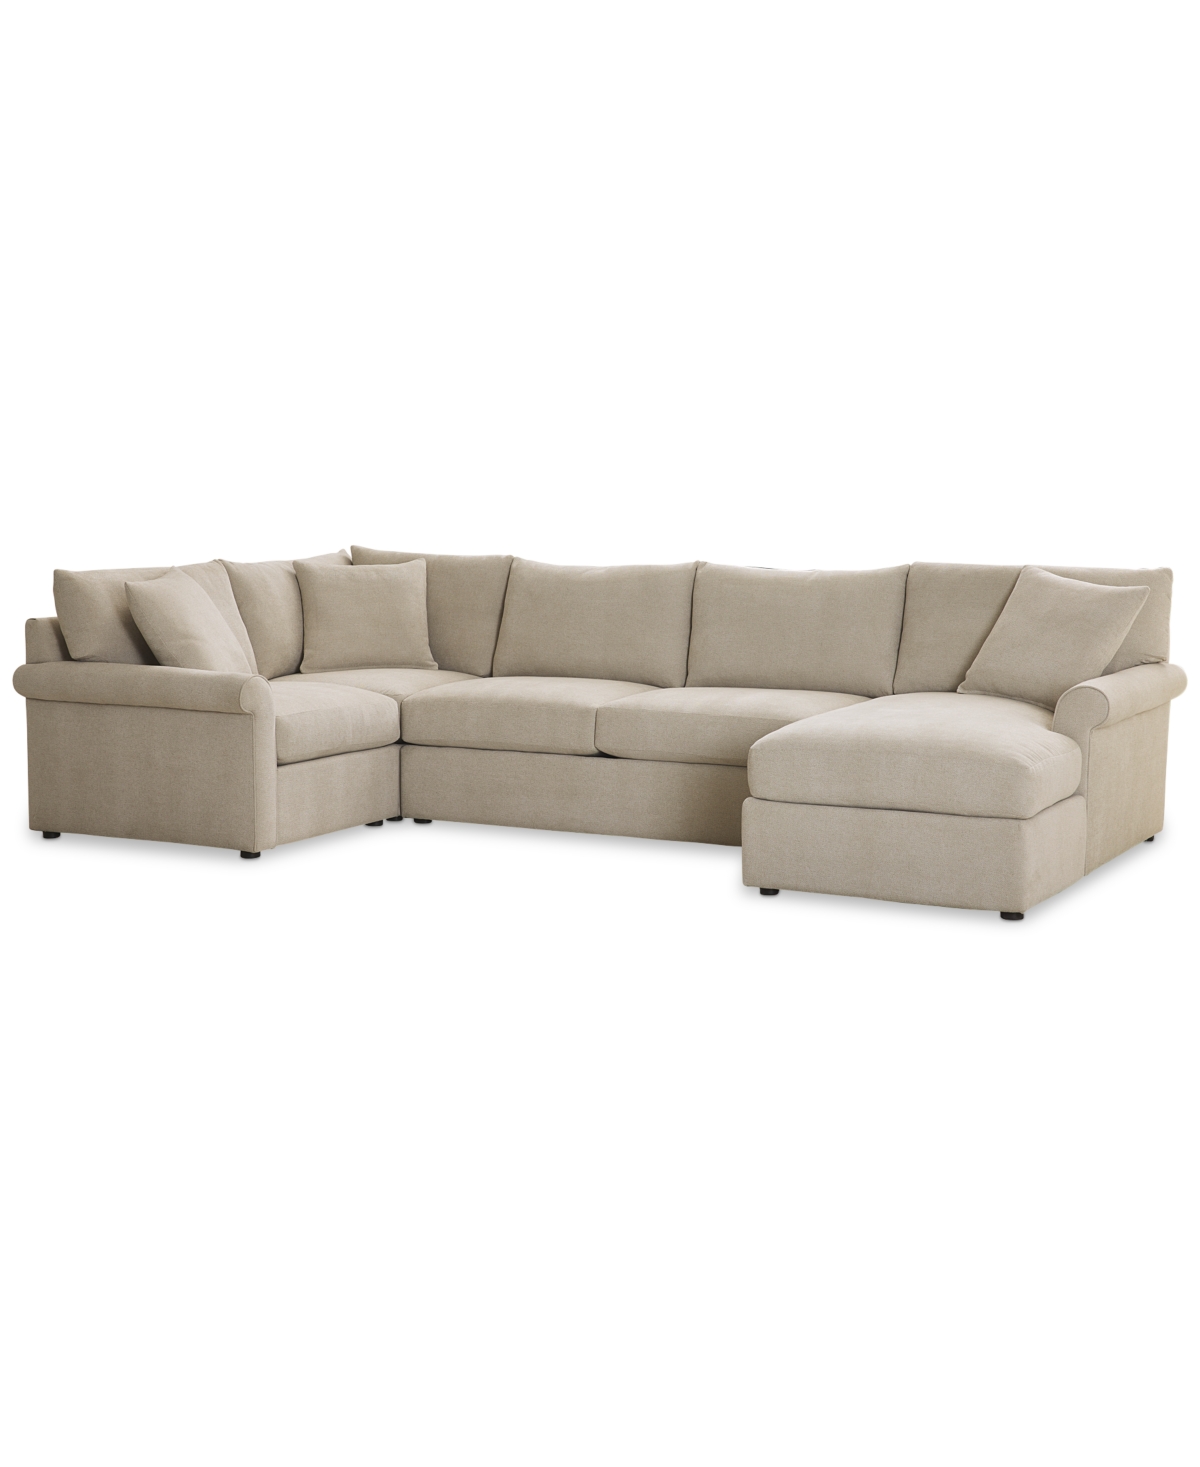 Furniture Wrenley 138" 4-pc. Fabric Modular Chaise Sectional Sofa, Created For Macy's In Dove